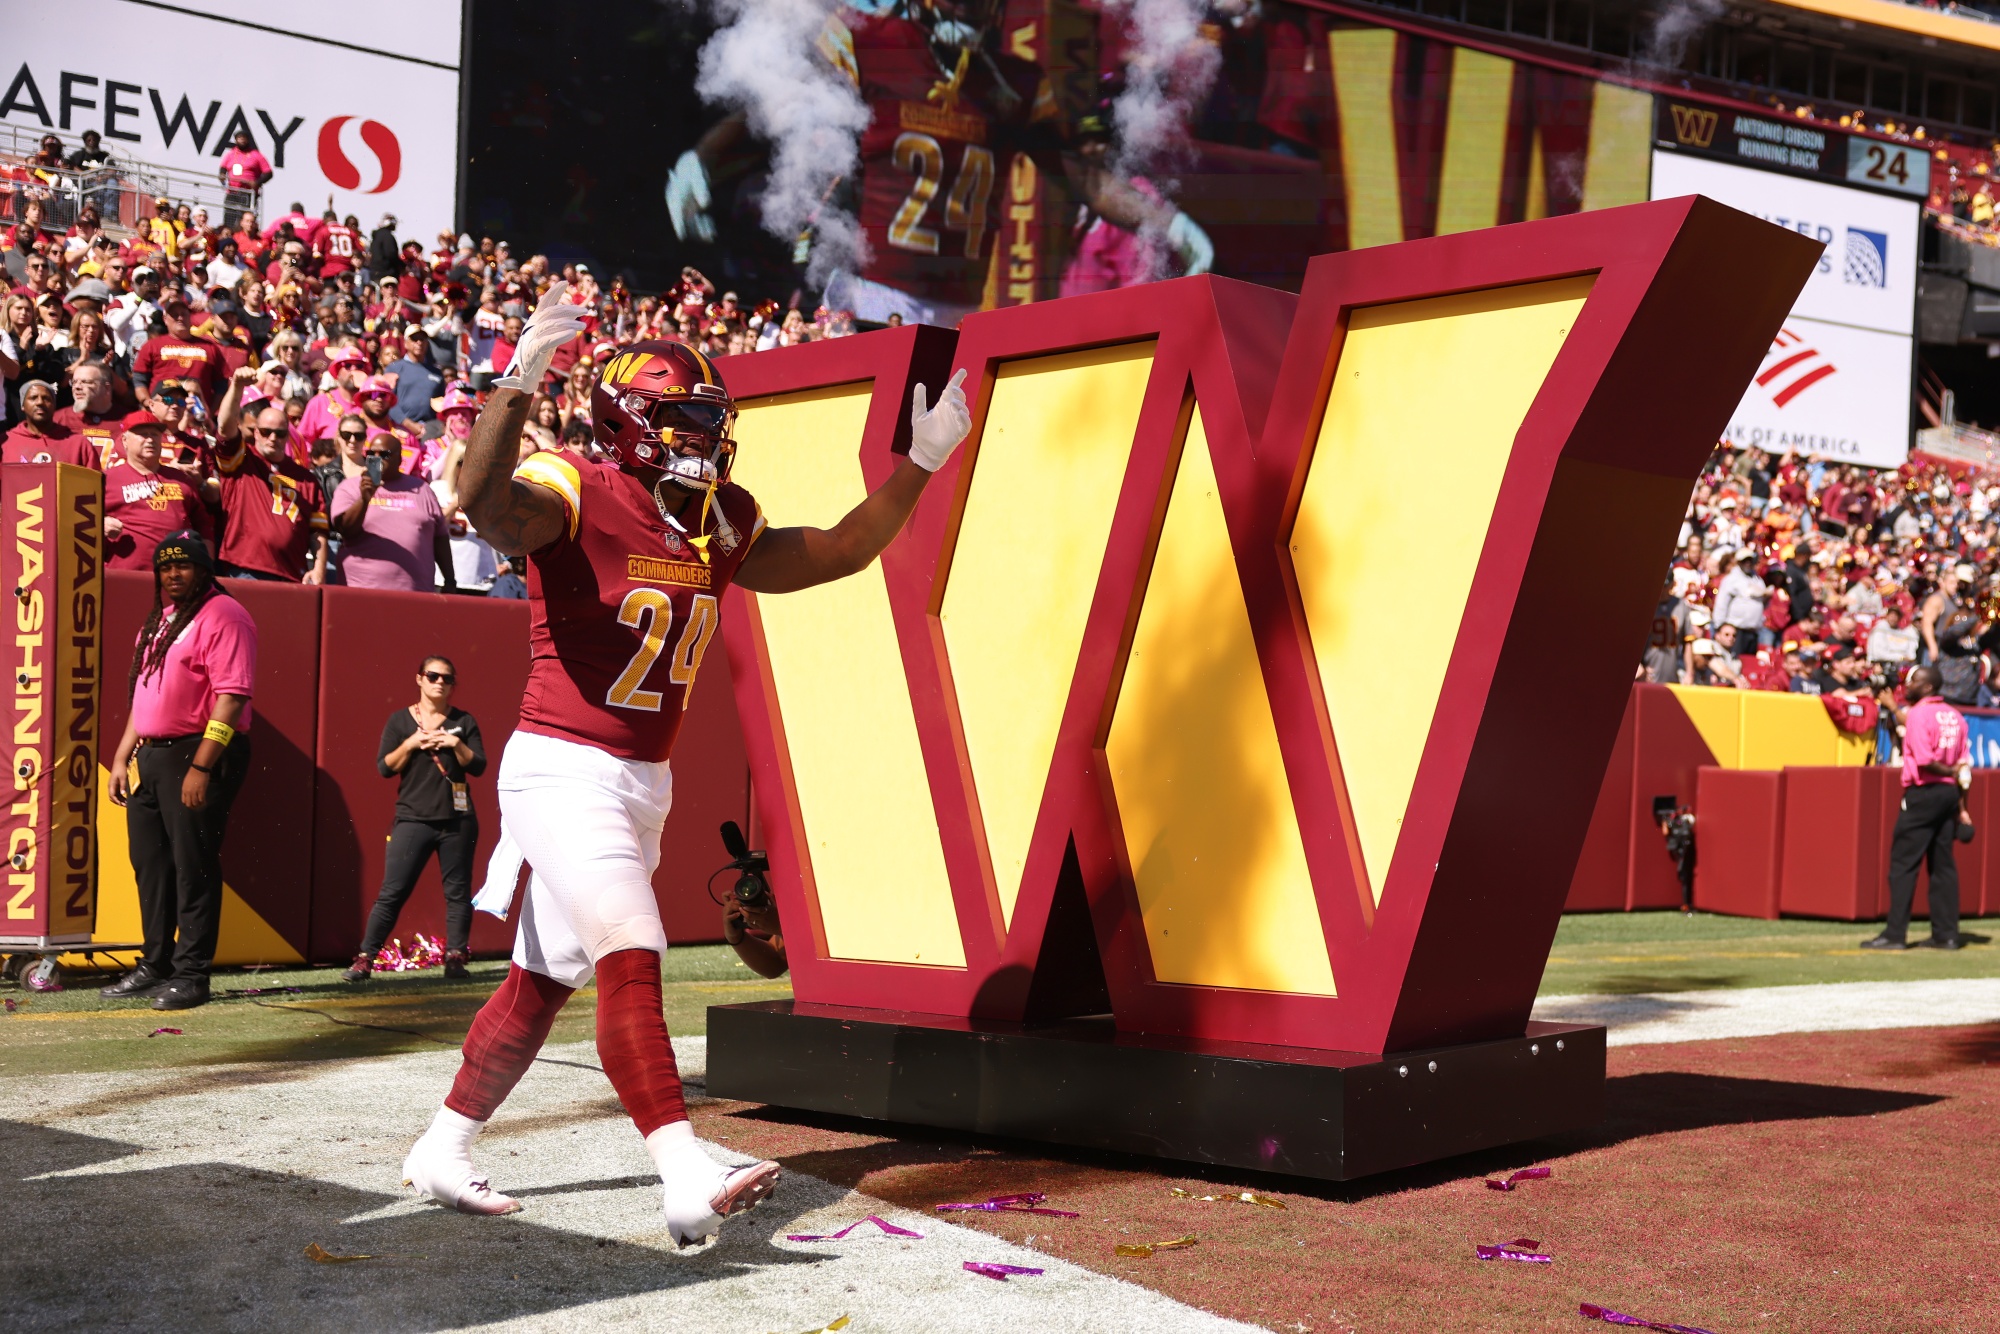 Dan Snyder to Proceed With Sale of Washington Commanders to Josh